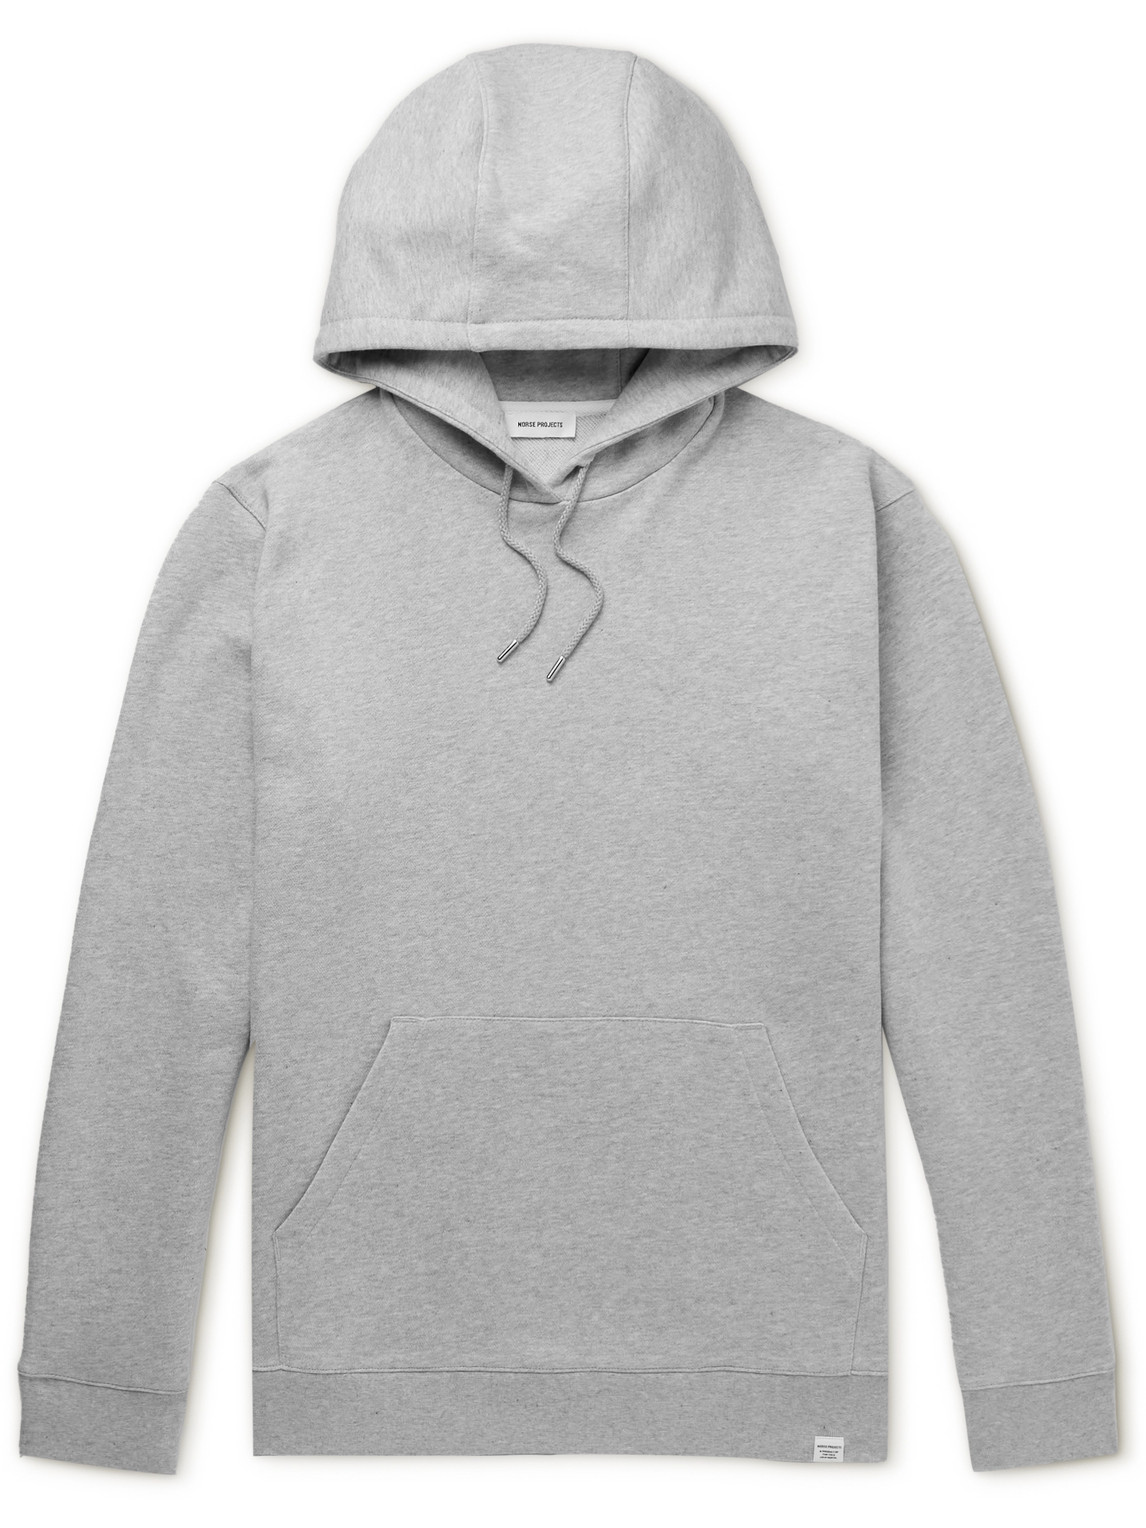 Norse Projects - Vagn Cotton-Jersey Hoodie - Men - Gray - M von Norse Projects